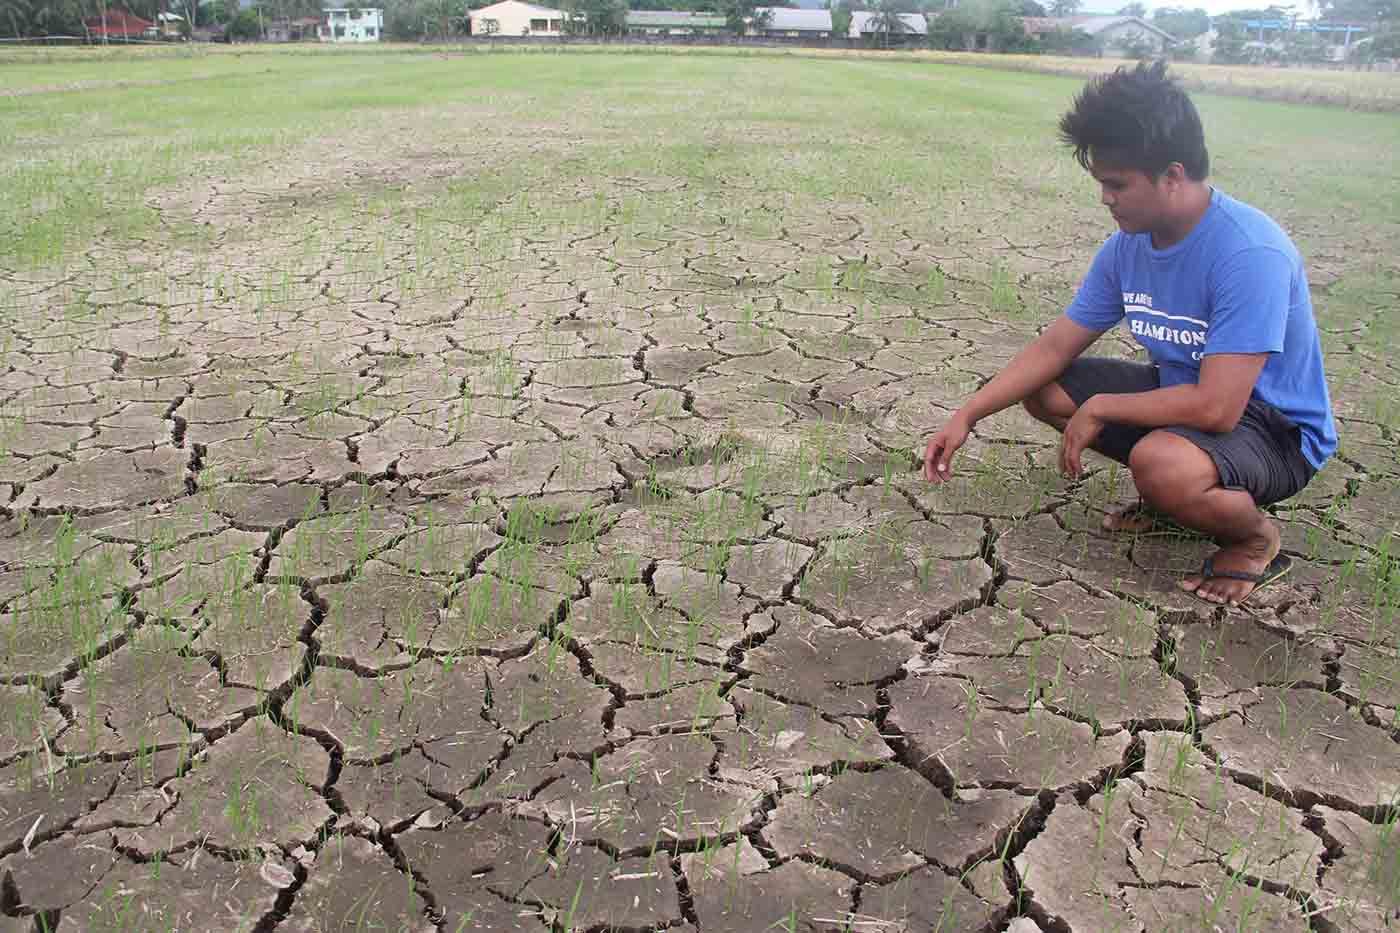 Over 1,000 hectares of riceland in Bicol barren due to drought